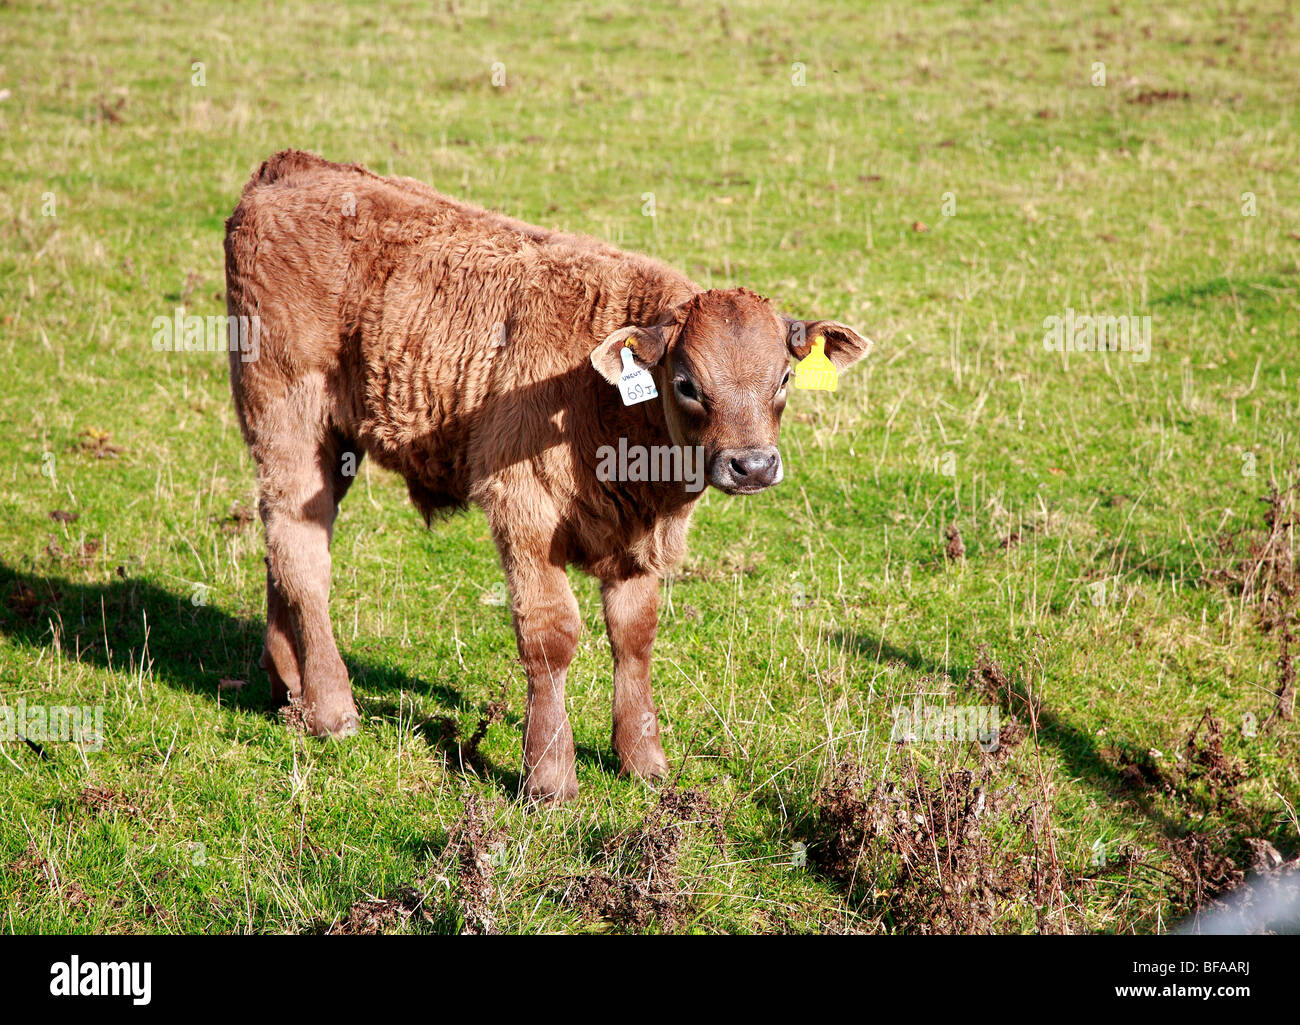 A young calf with ear tags Stock Photo